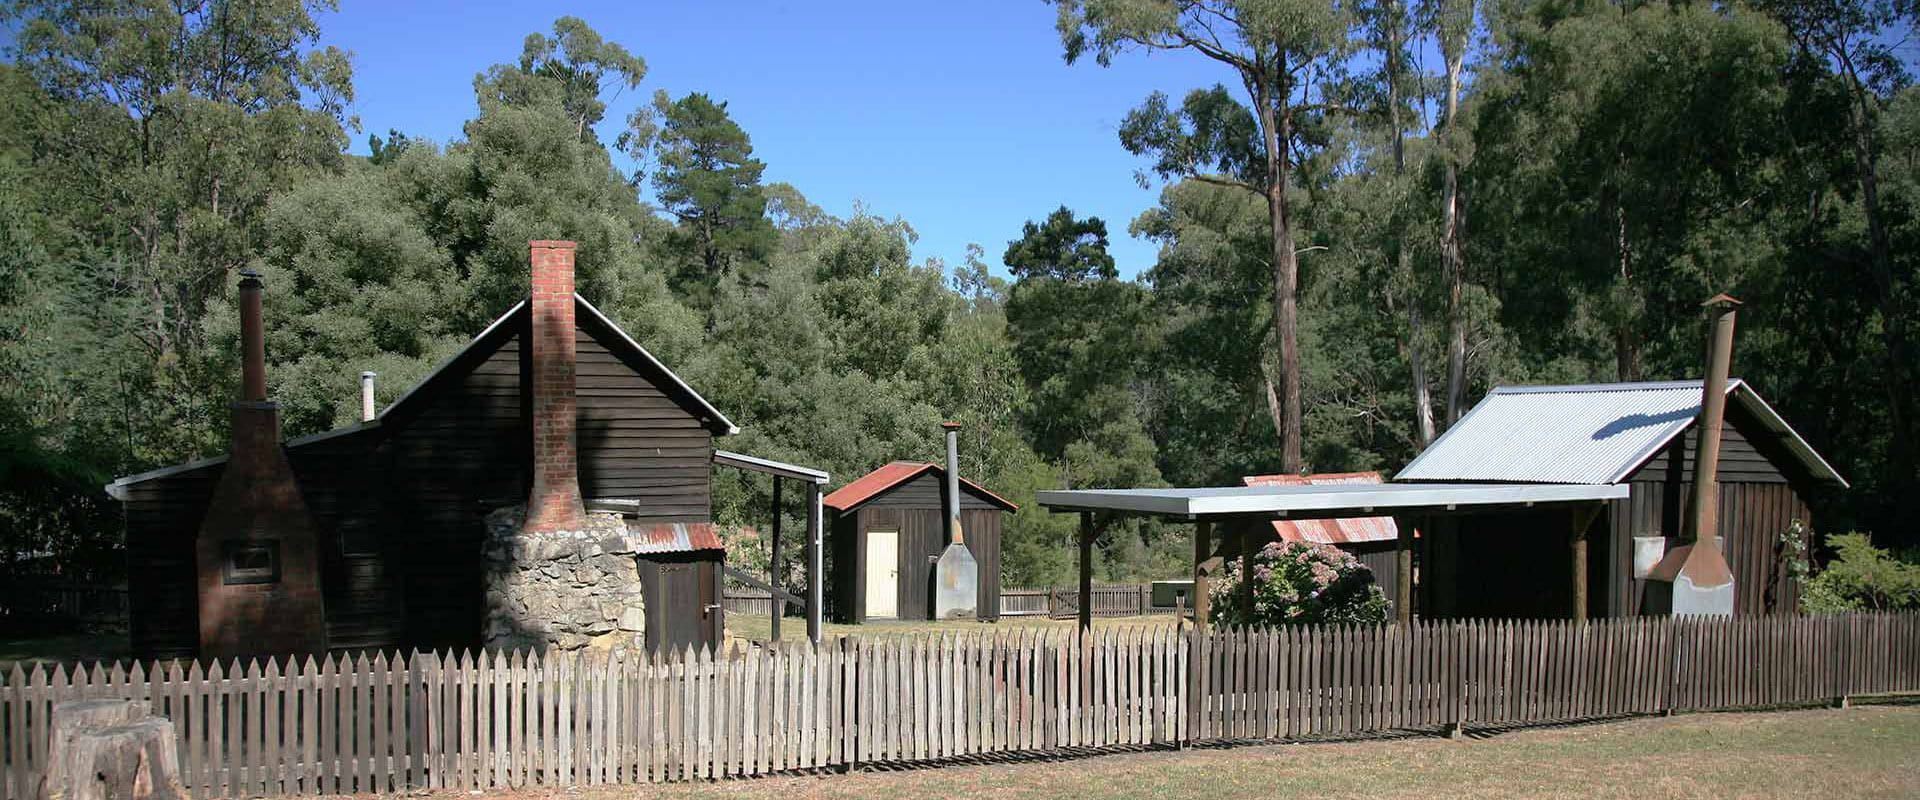 18th century historic buildings in a bush setting